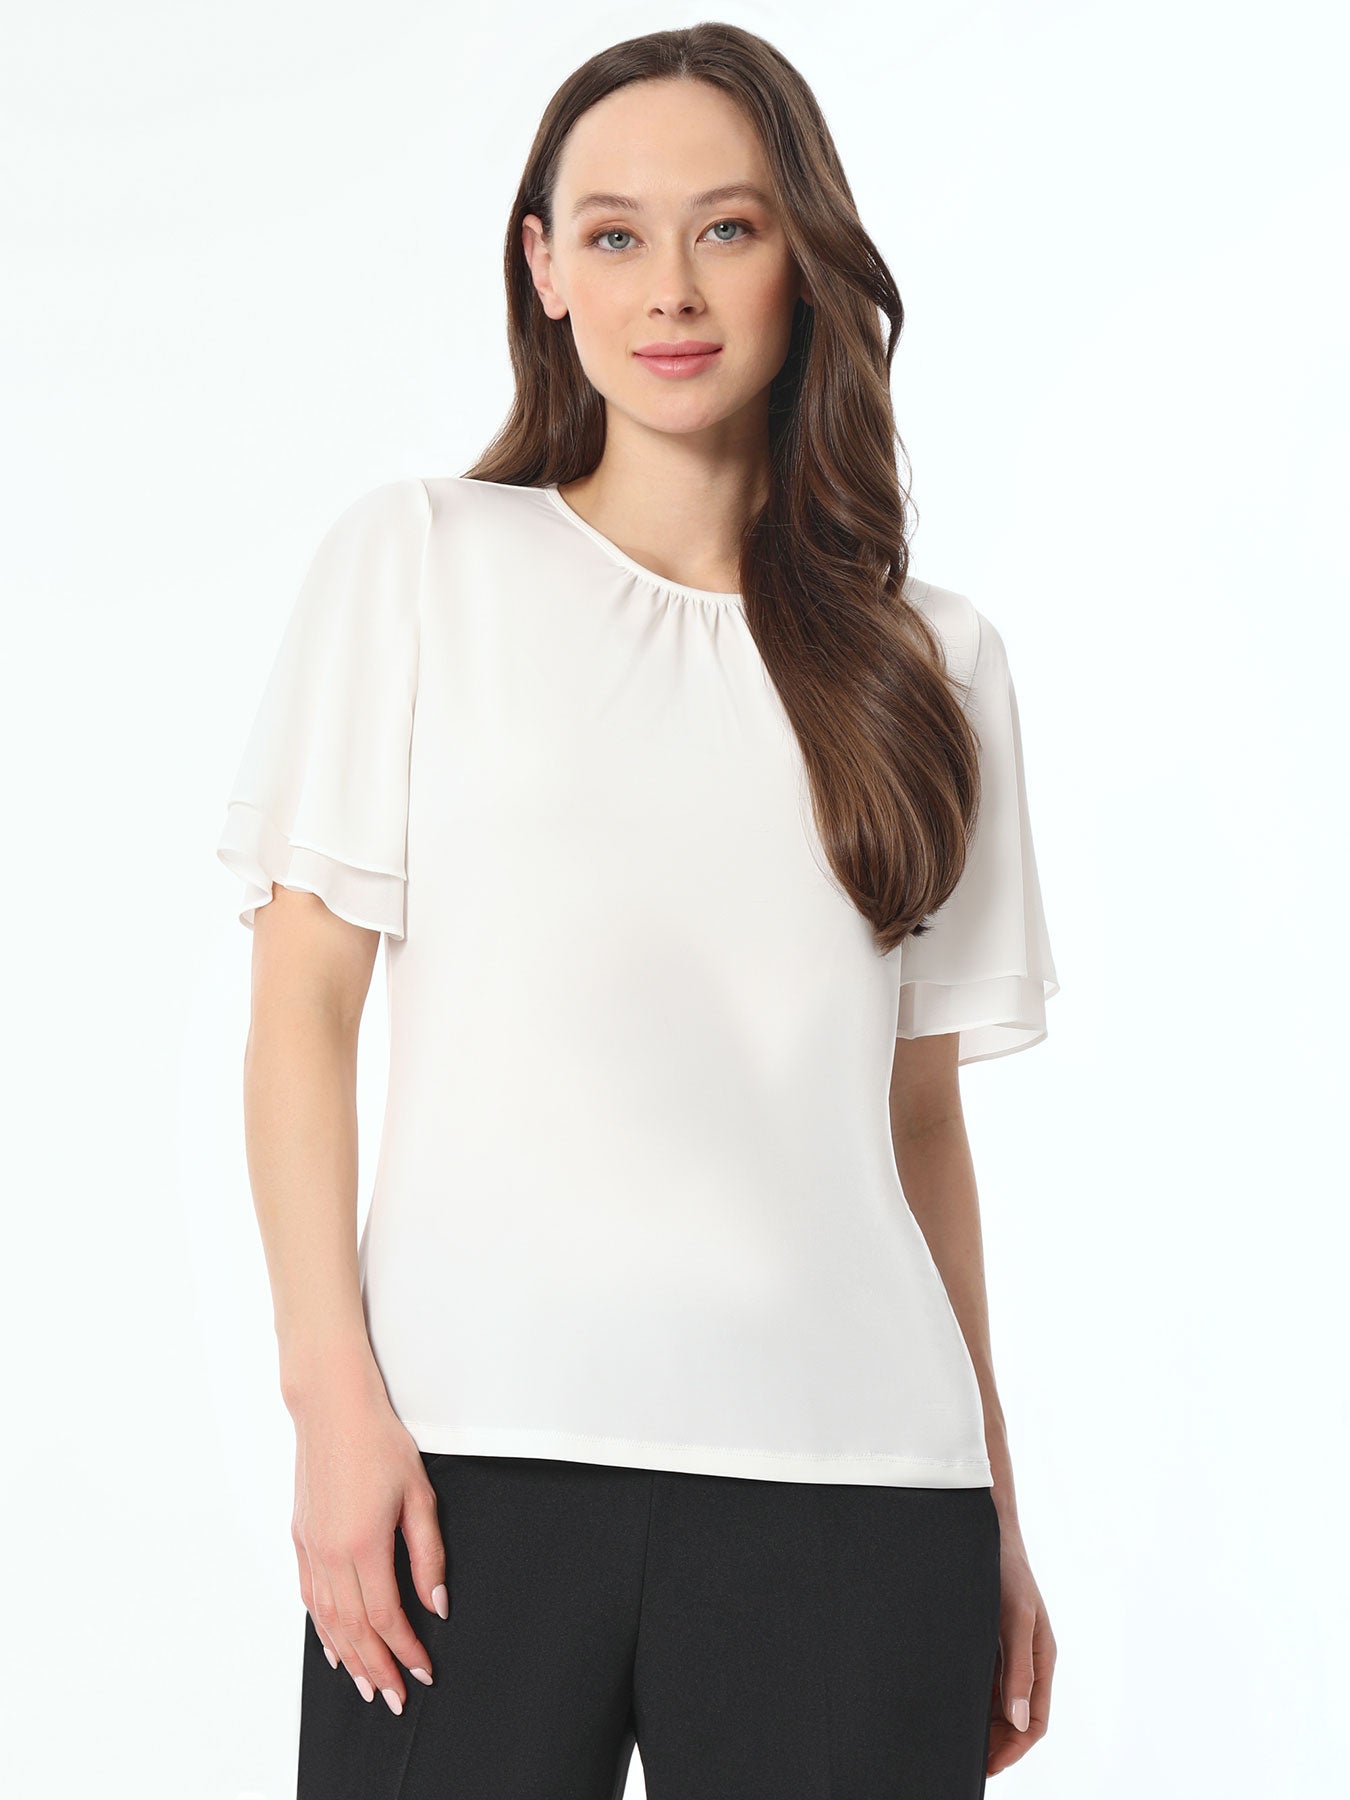 KASPER BLOUSE/NEW WITH TAG/RETAIL$69/SIZE SMALL /BUST 38/WHITE